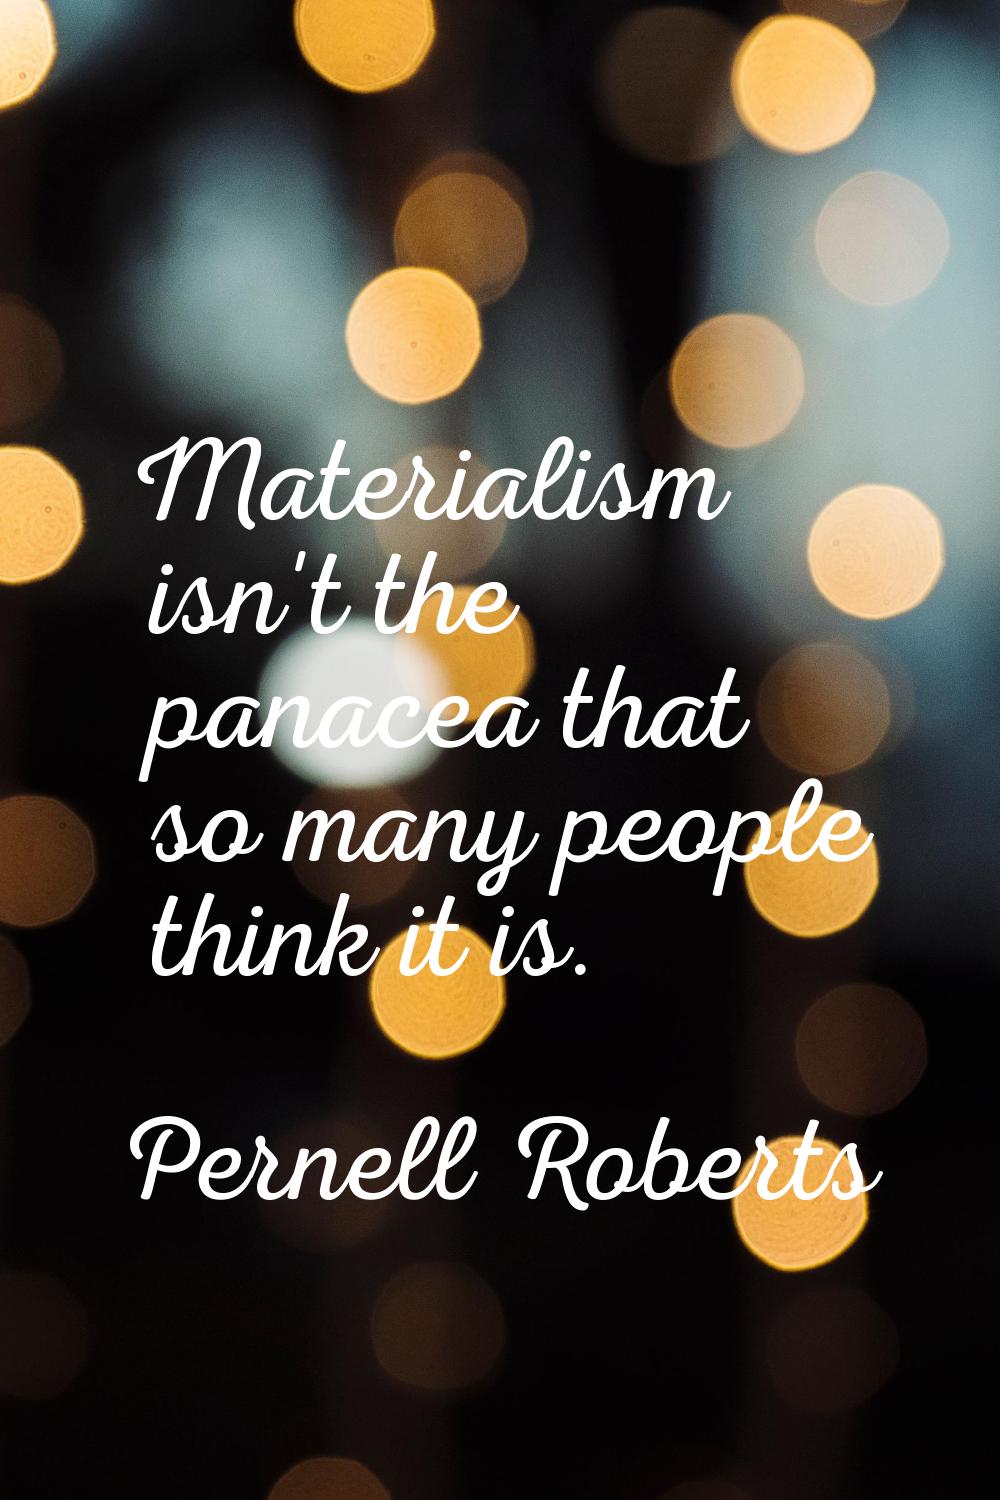 Materialism isn't the panacea that so many people think it is.